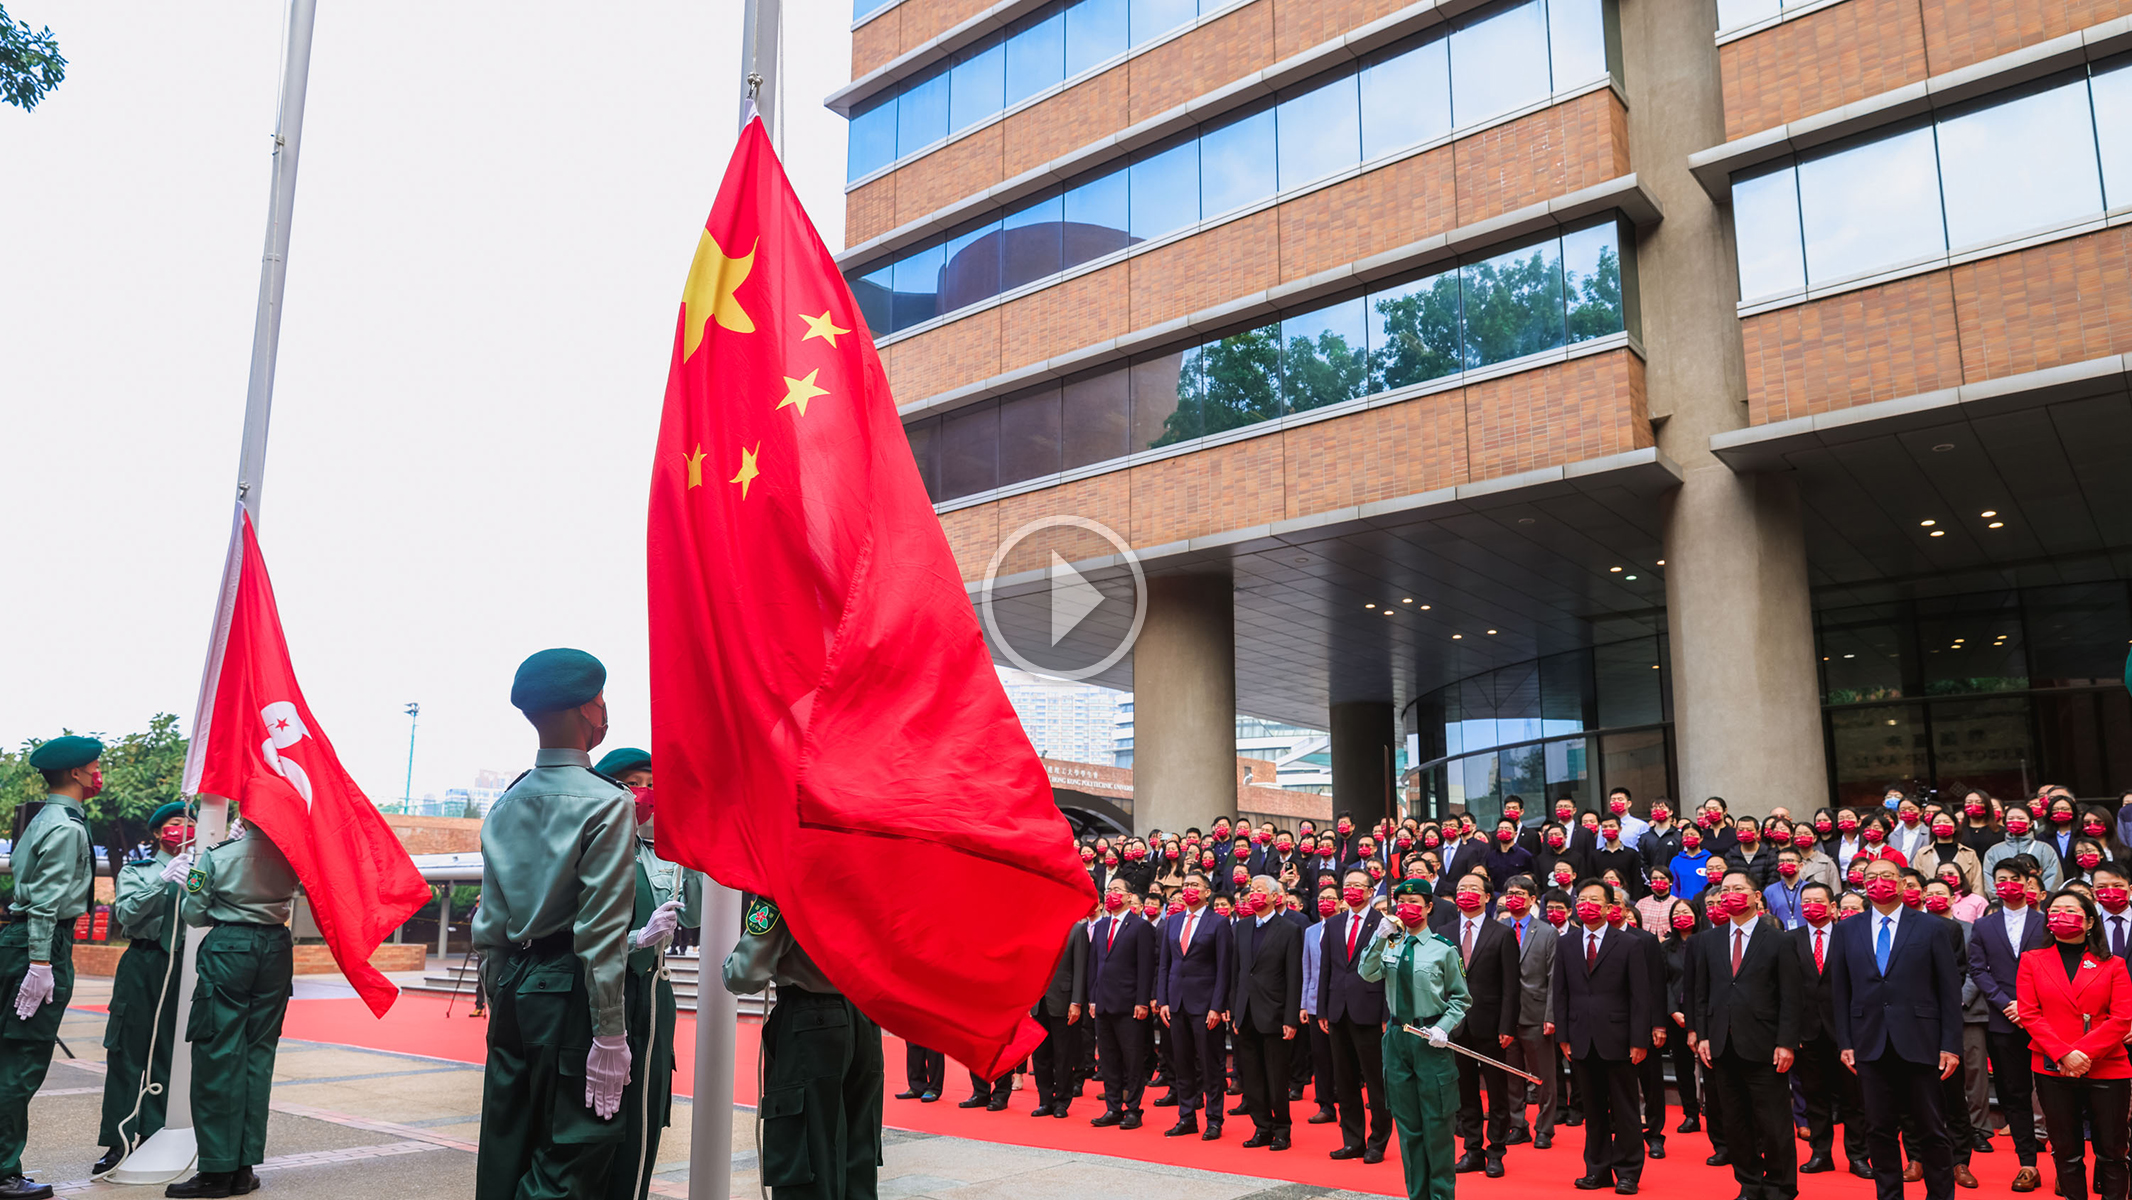 Hundreds gather on campus for first flag-raising ceremony of 2022 